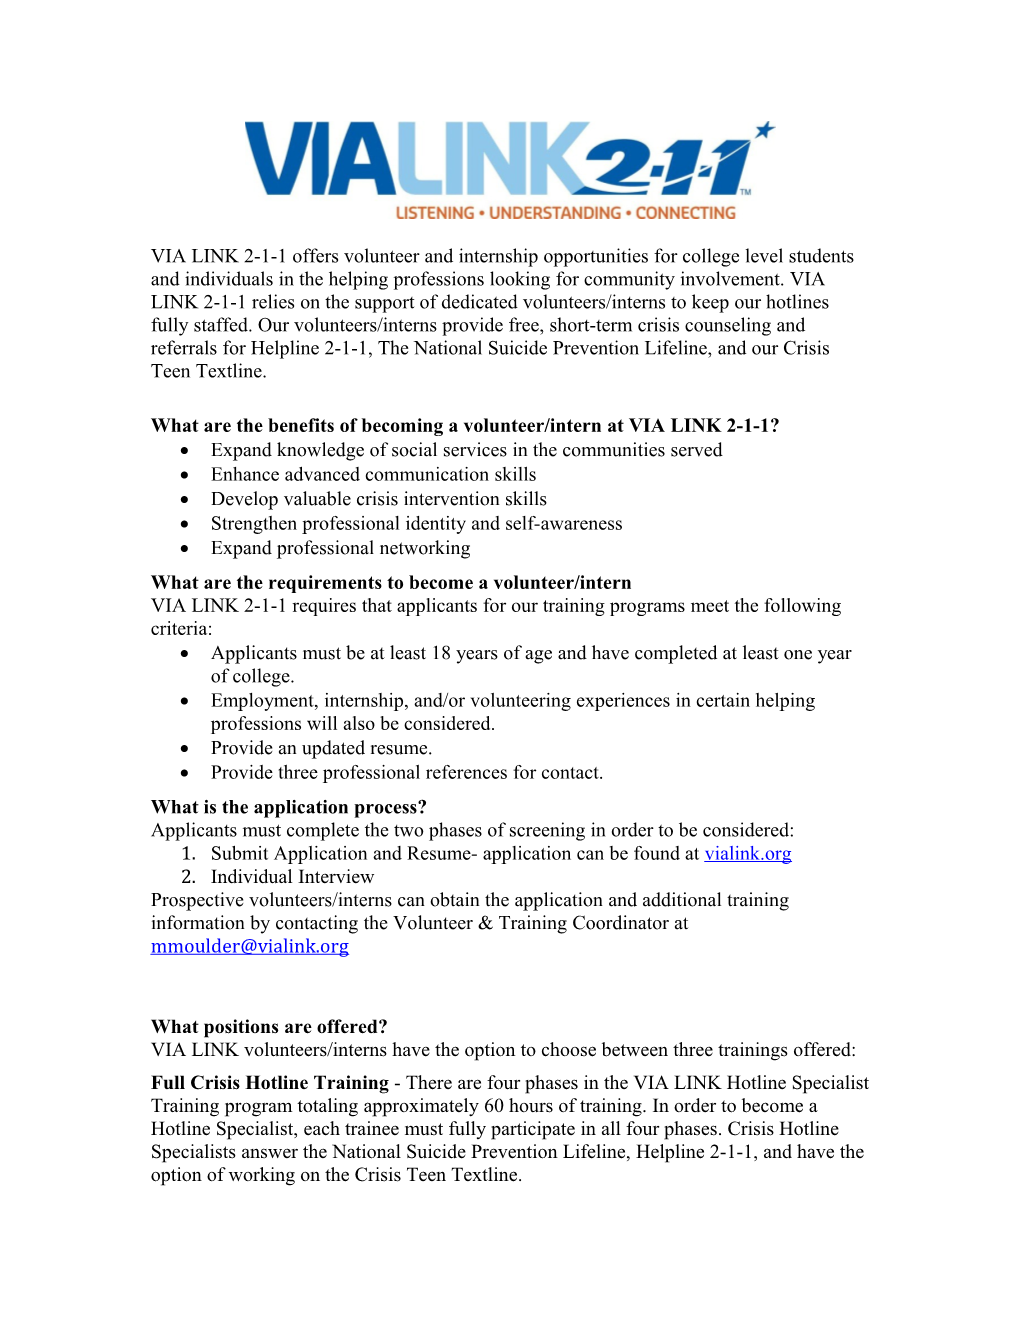 What Are the Benefits of Becoming a Volunteer/Intern at VIA LINK 2-1-1?